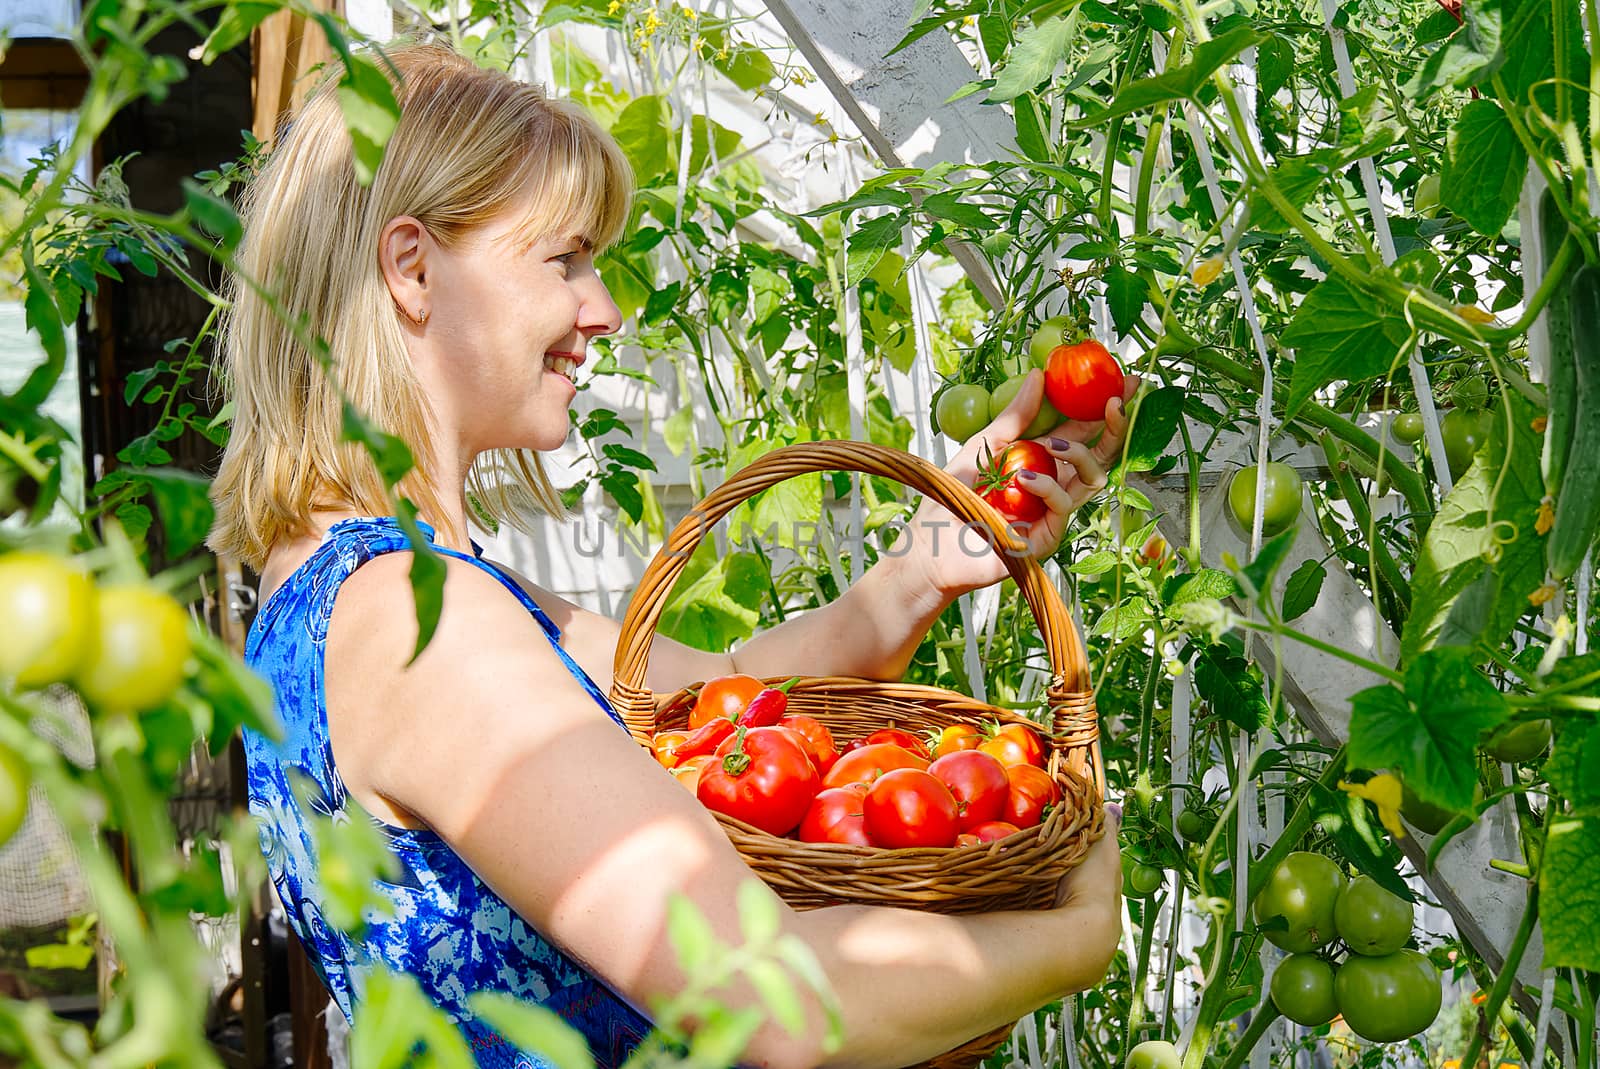 in the greenhouse smiling blond woman collects ripe red ecological tomatoes into a wicker basket. eco food home gardening concept. by PhotoTime